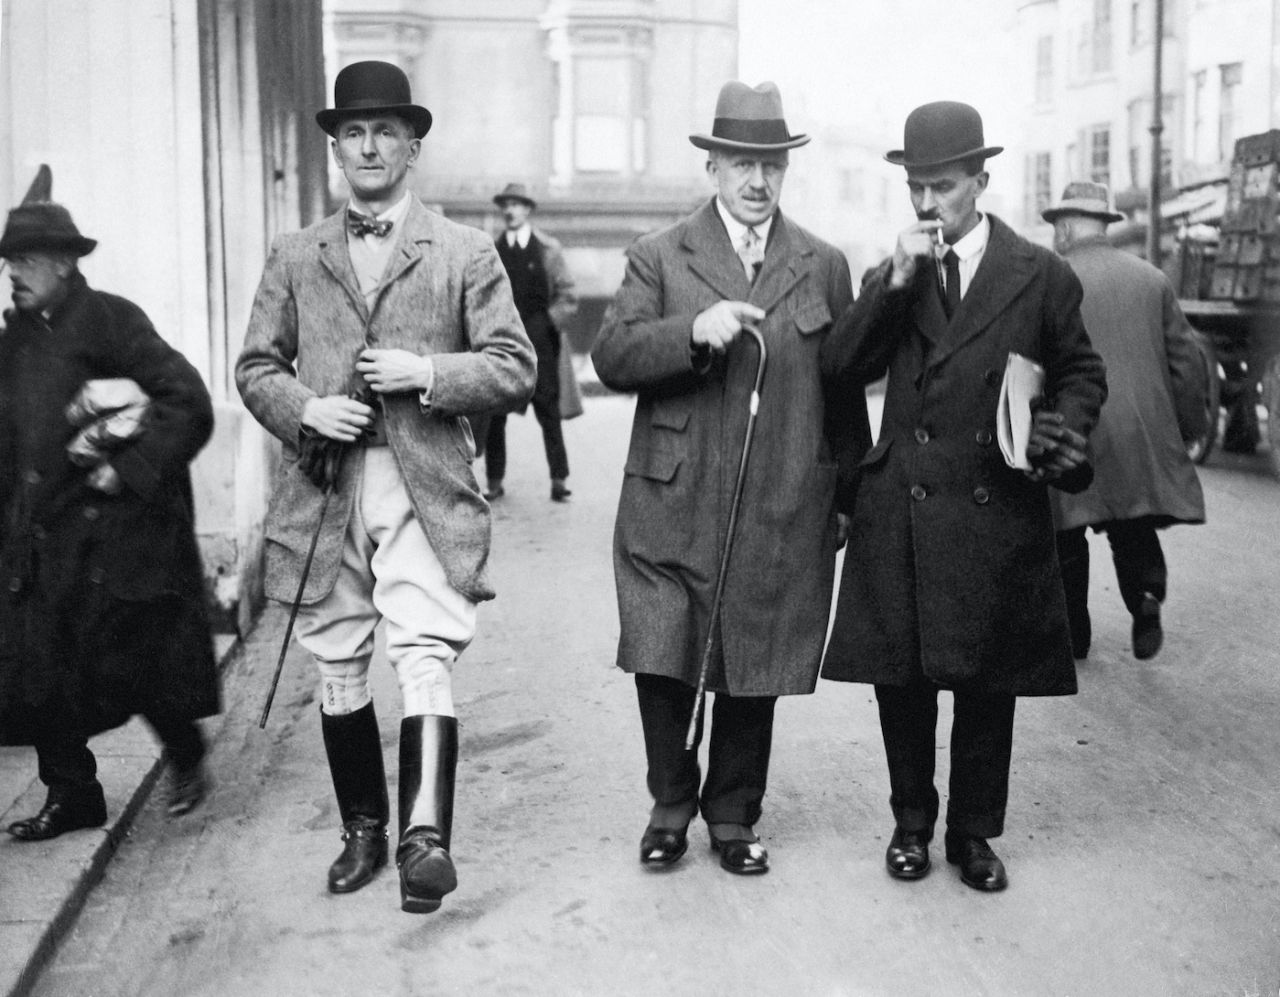 CB Fry after filing his nomination to parliament for the Brighton constituency, November 11,1922